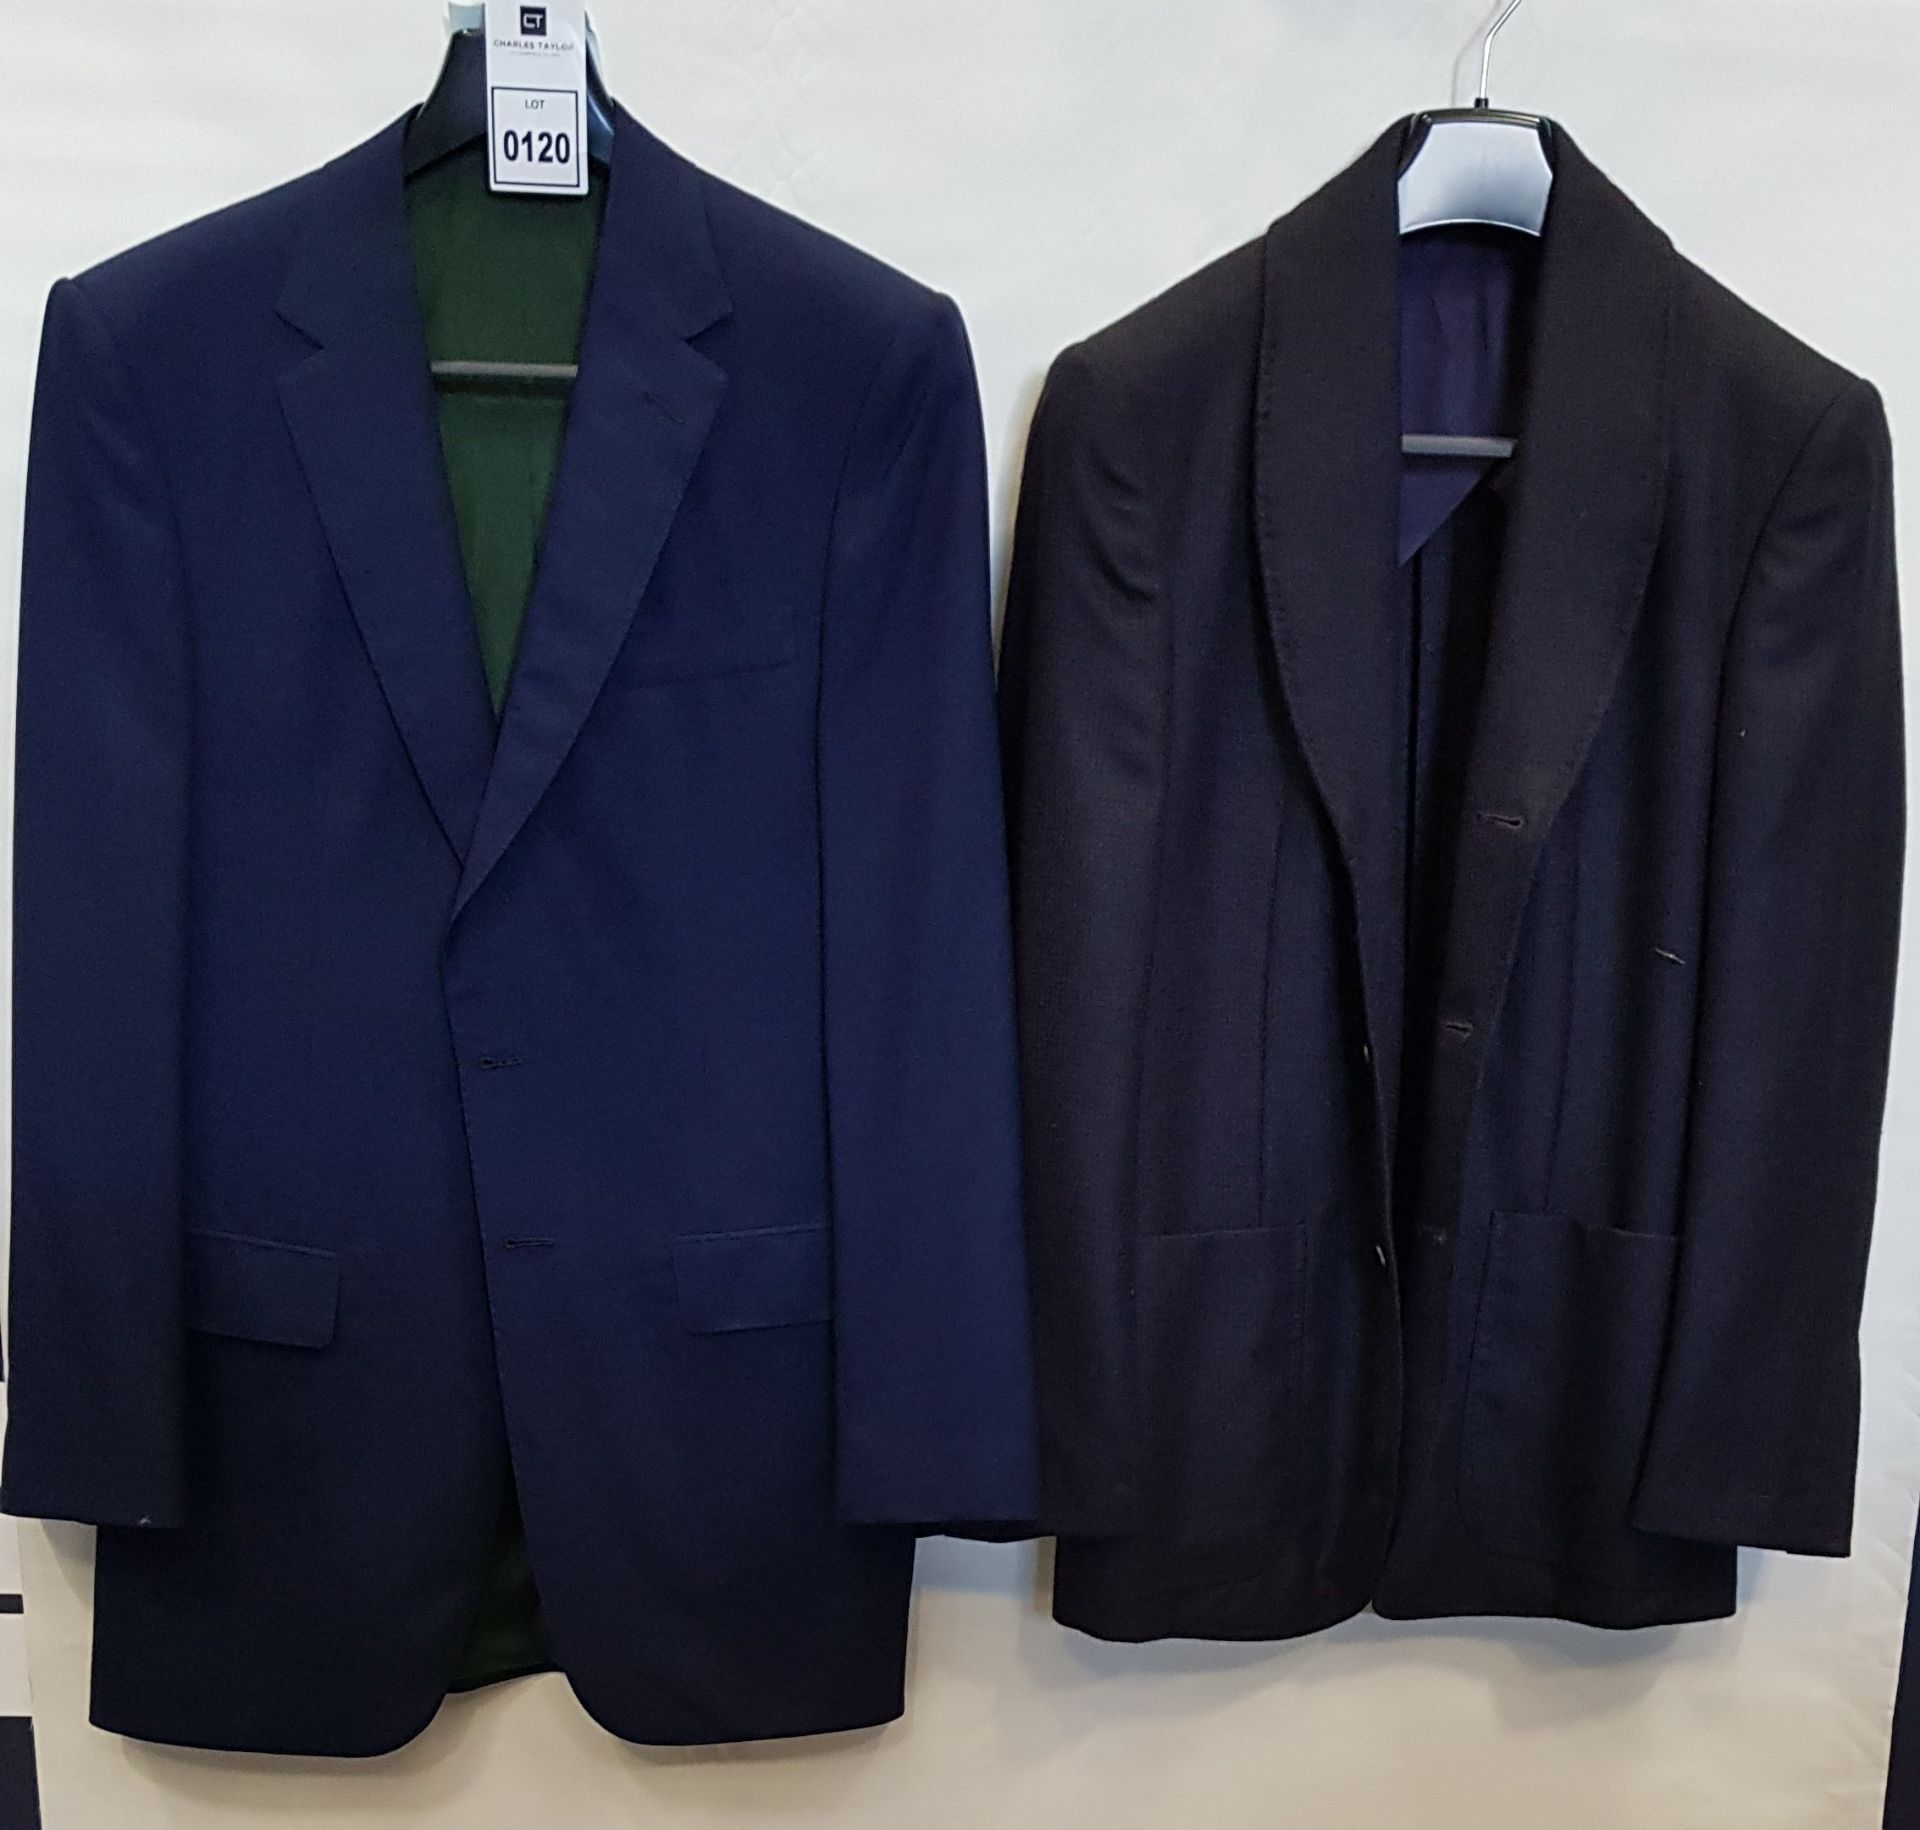 5 X BRAND NEW LUTWYCHE BLUE JACKETS IN VARIOUS SIZES & STYLES (NOTE NOT FULLY TAILORED)